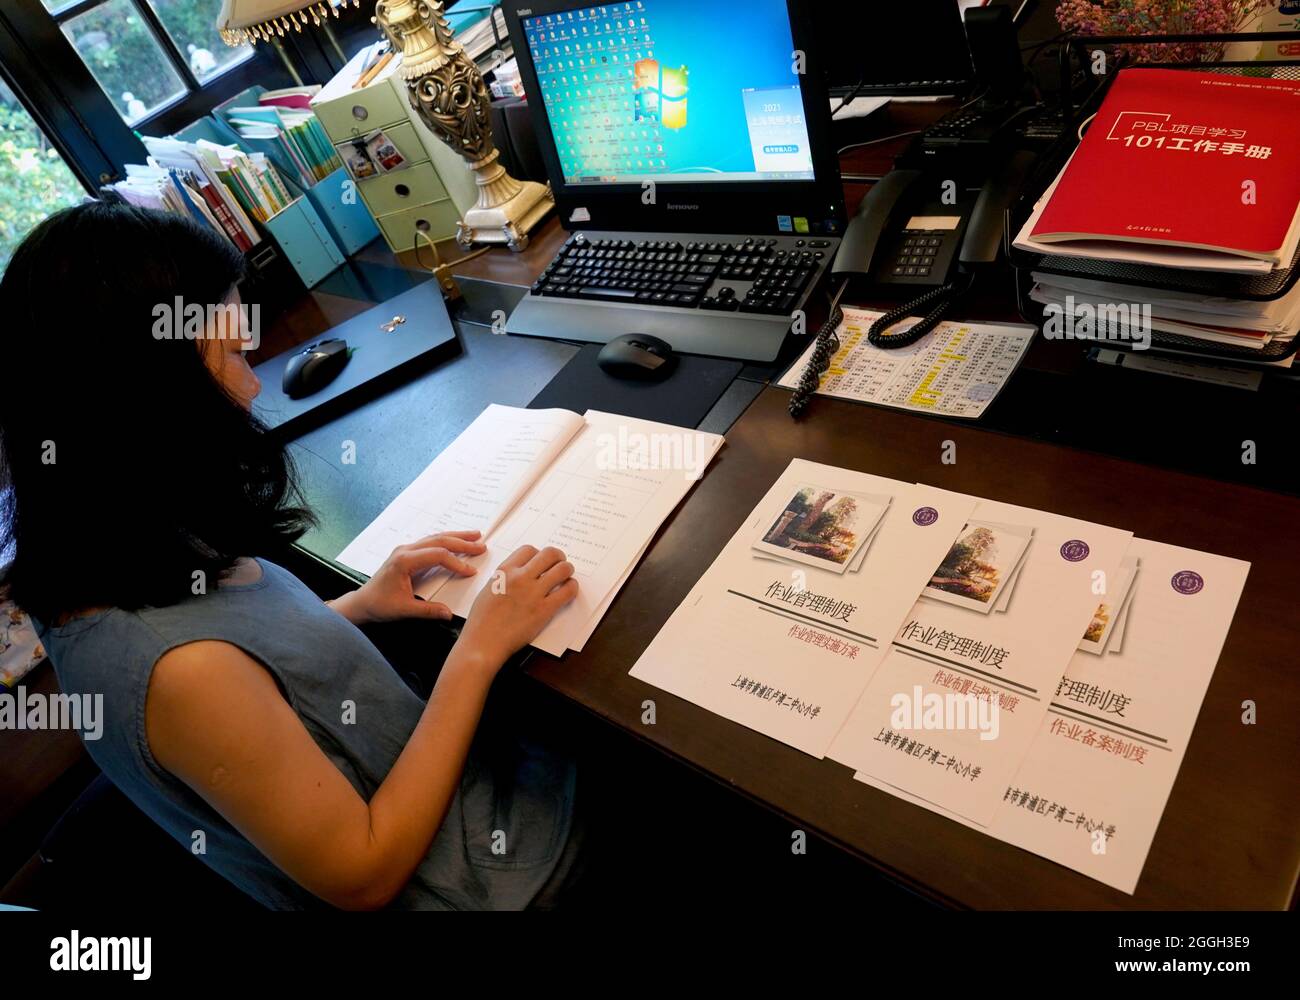 Shanghai. 1st Sep, 2021. A teacher views the new regulation on assigning homework at an elementary school in east China's Shanghai, Sept. 1, 2021. Elementary and middle schools in China kicked off a new school year on Wednesday. Credit: Liu Ying/Xinhua/Alamy Live News Stock Photo